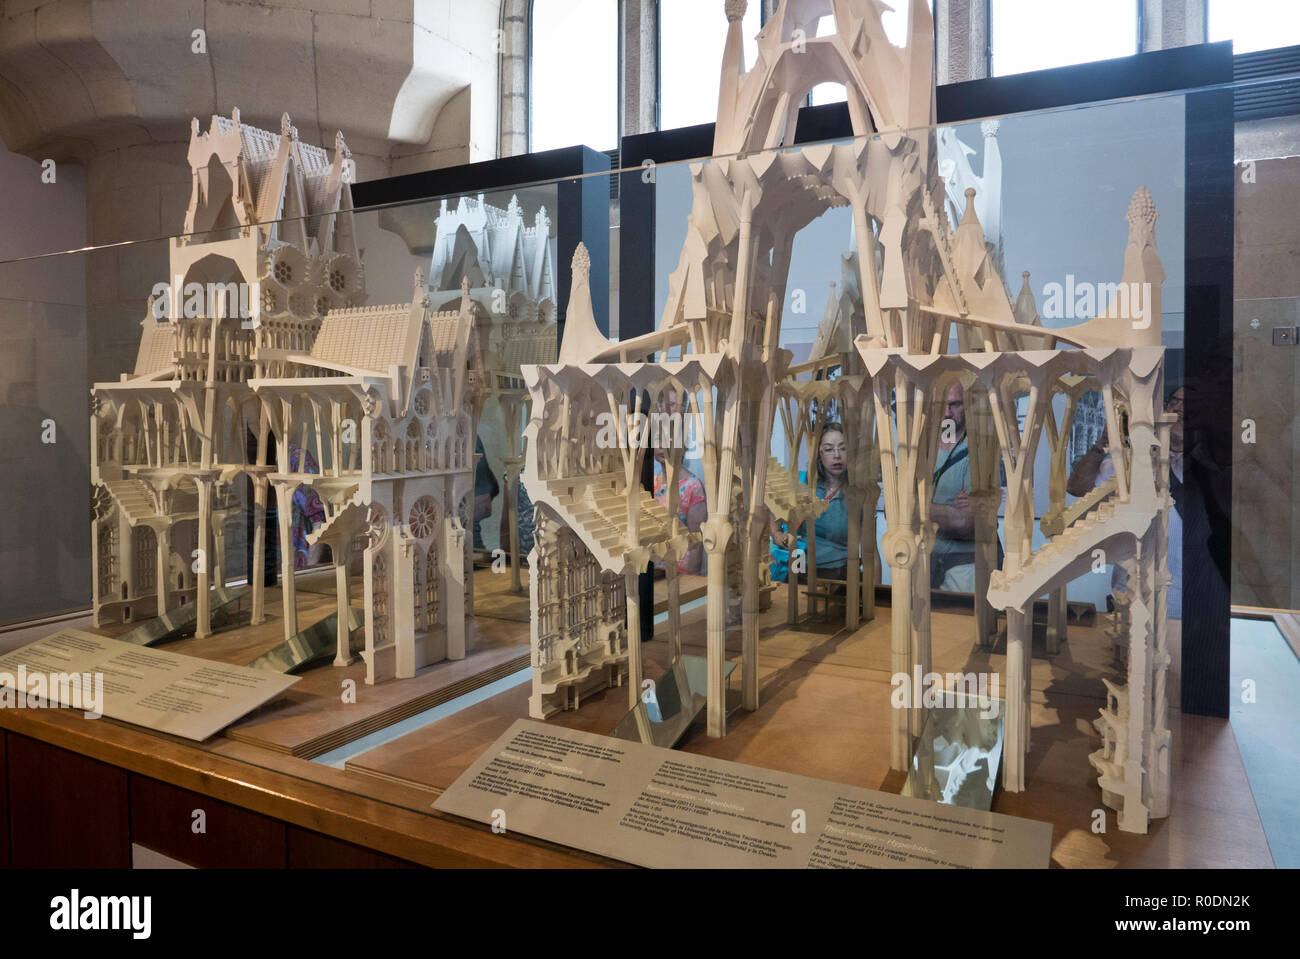 Two small model buildings on display in the Sagrada Familia gallery, Barcelona, Spain Stock Photo